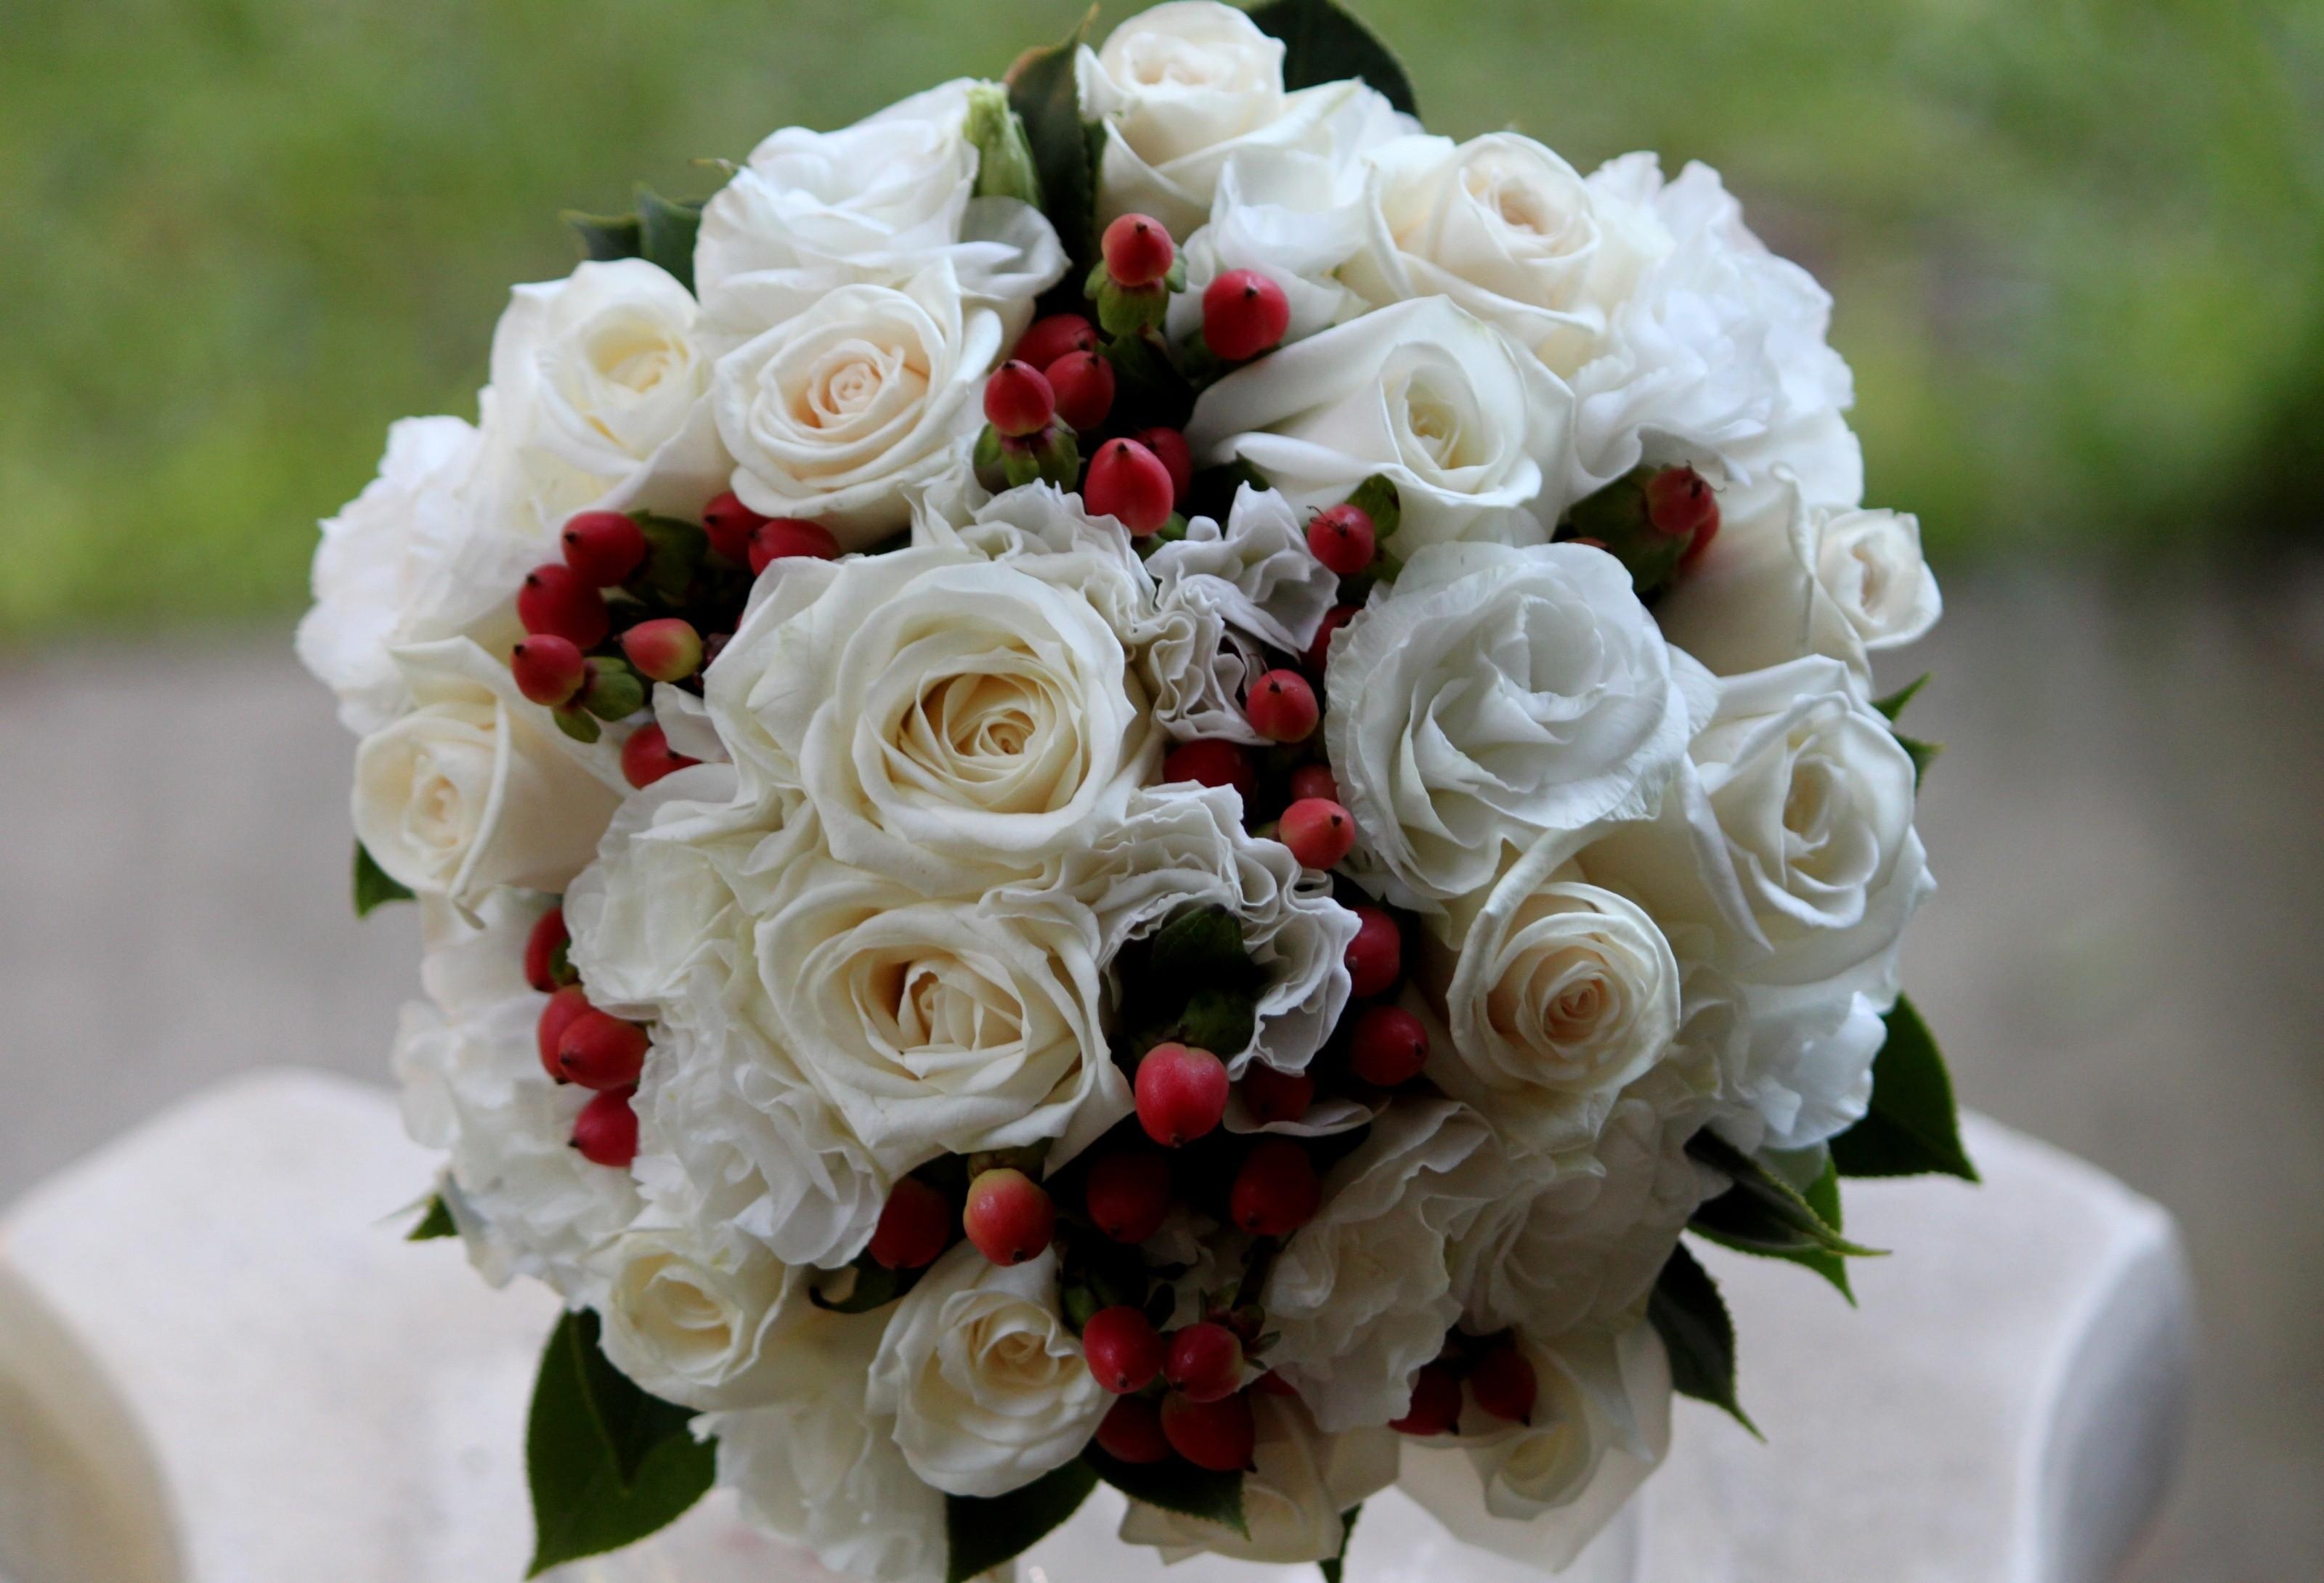 typography, flowers, roses, berries, registration, bouquet, handsomely, it's beautiful QHD